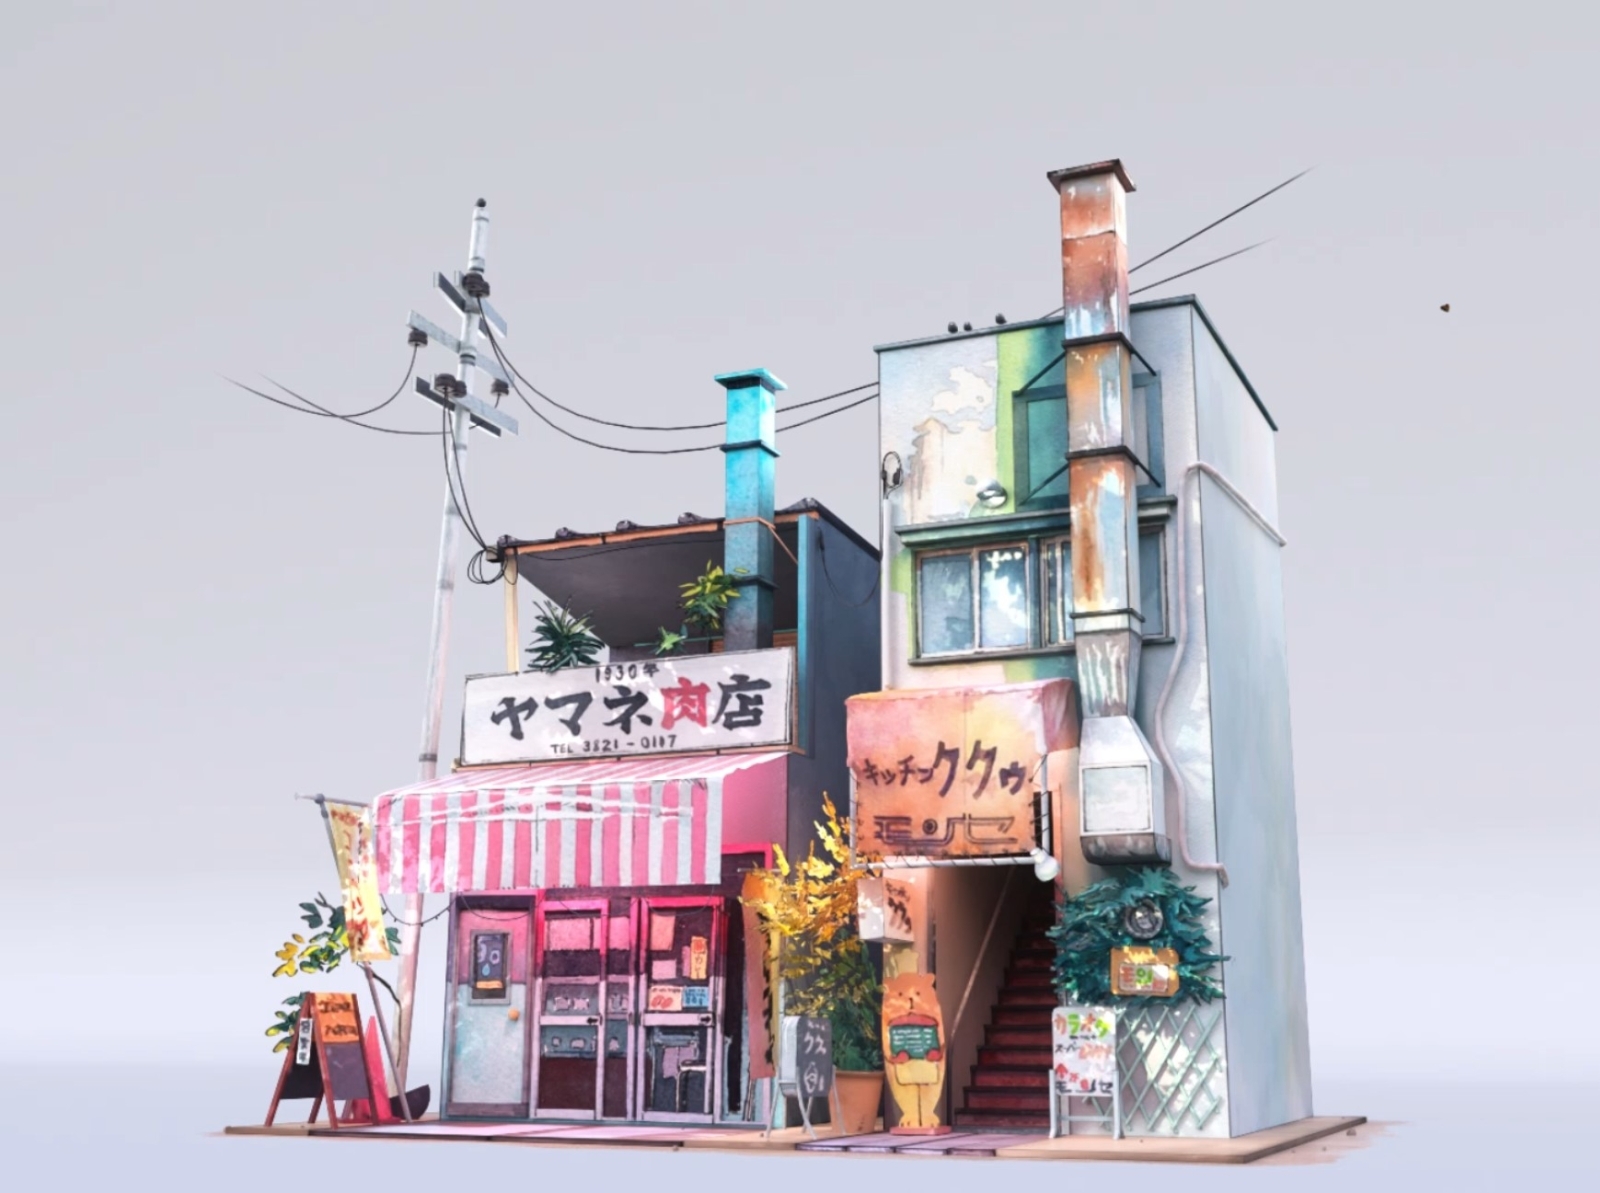 Tokyo Storefronts By Baptiste Lemaire On Dribbble